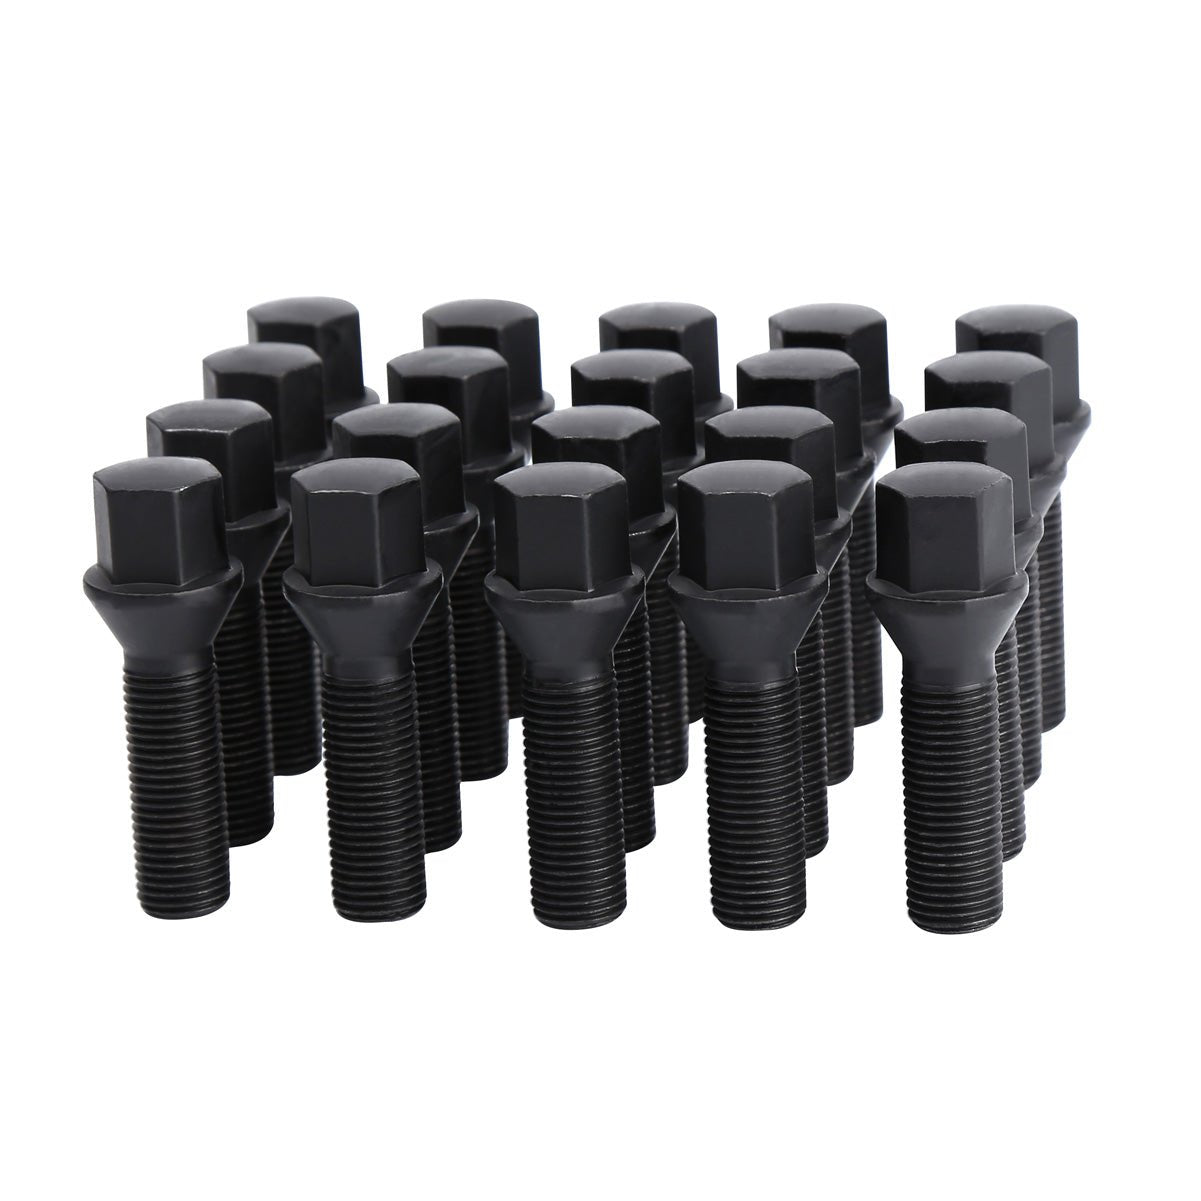 20pcs 45mm Shank Conical Seat M12x1.5 Aftermarket Lug bolts For Wheel Spacers xccscss.